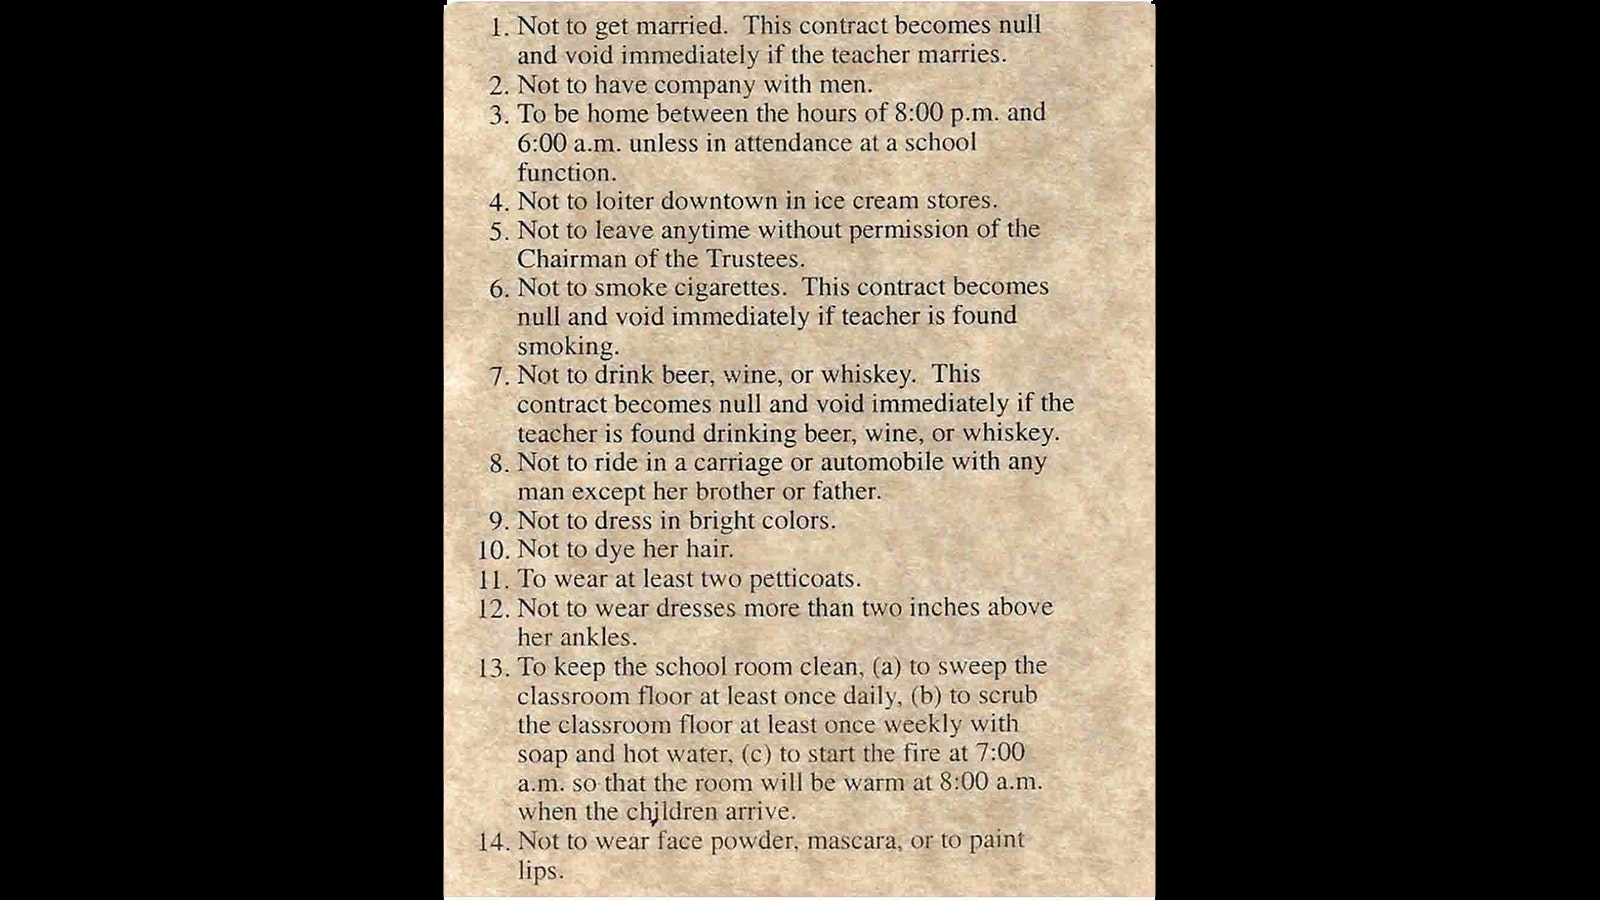 Rules of the teaching contract signed by Elise Mayor in 1926.